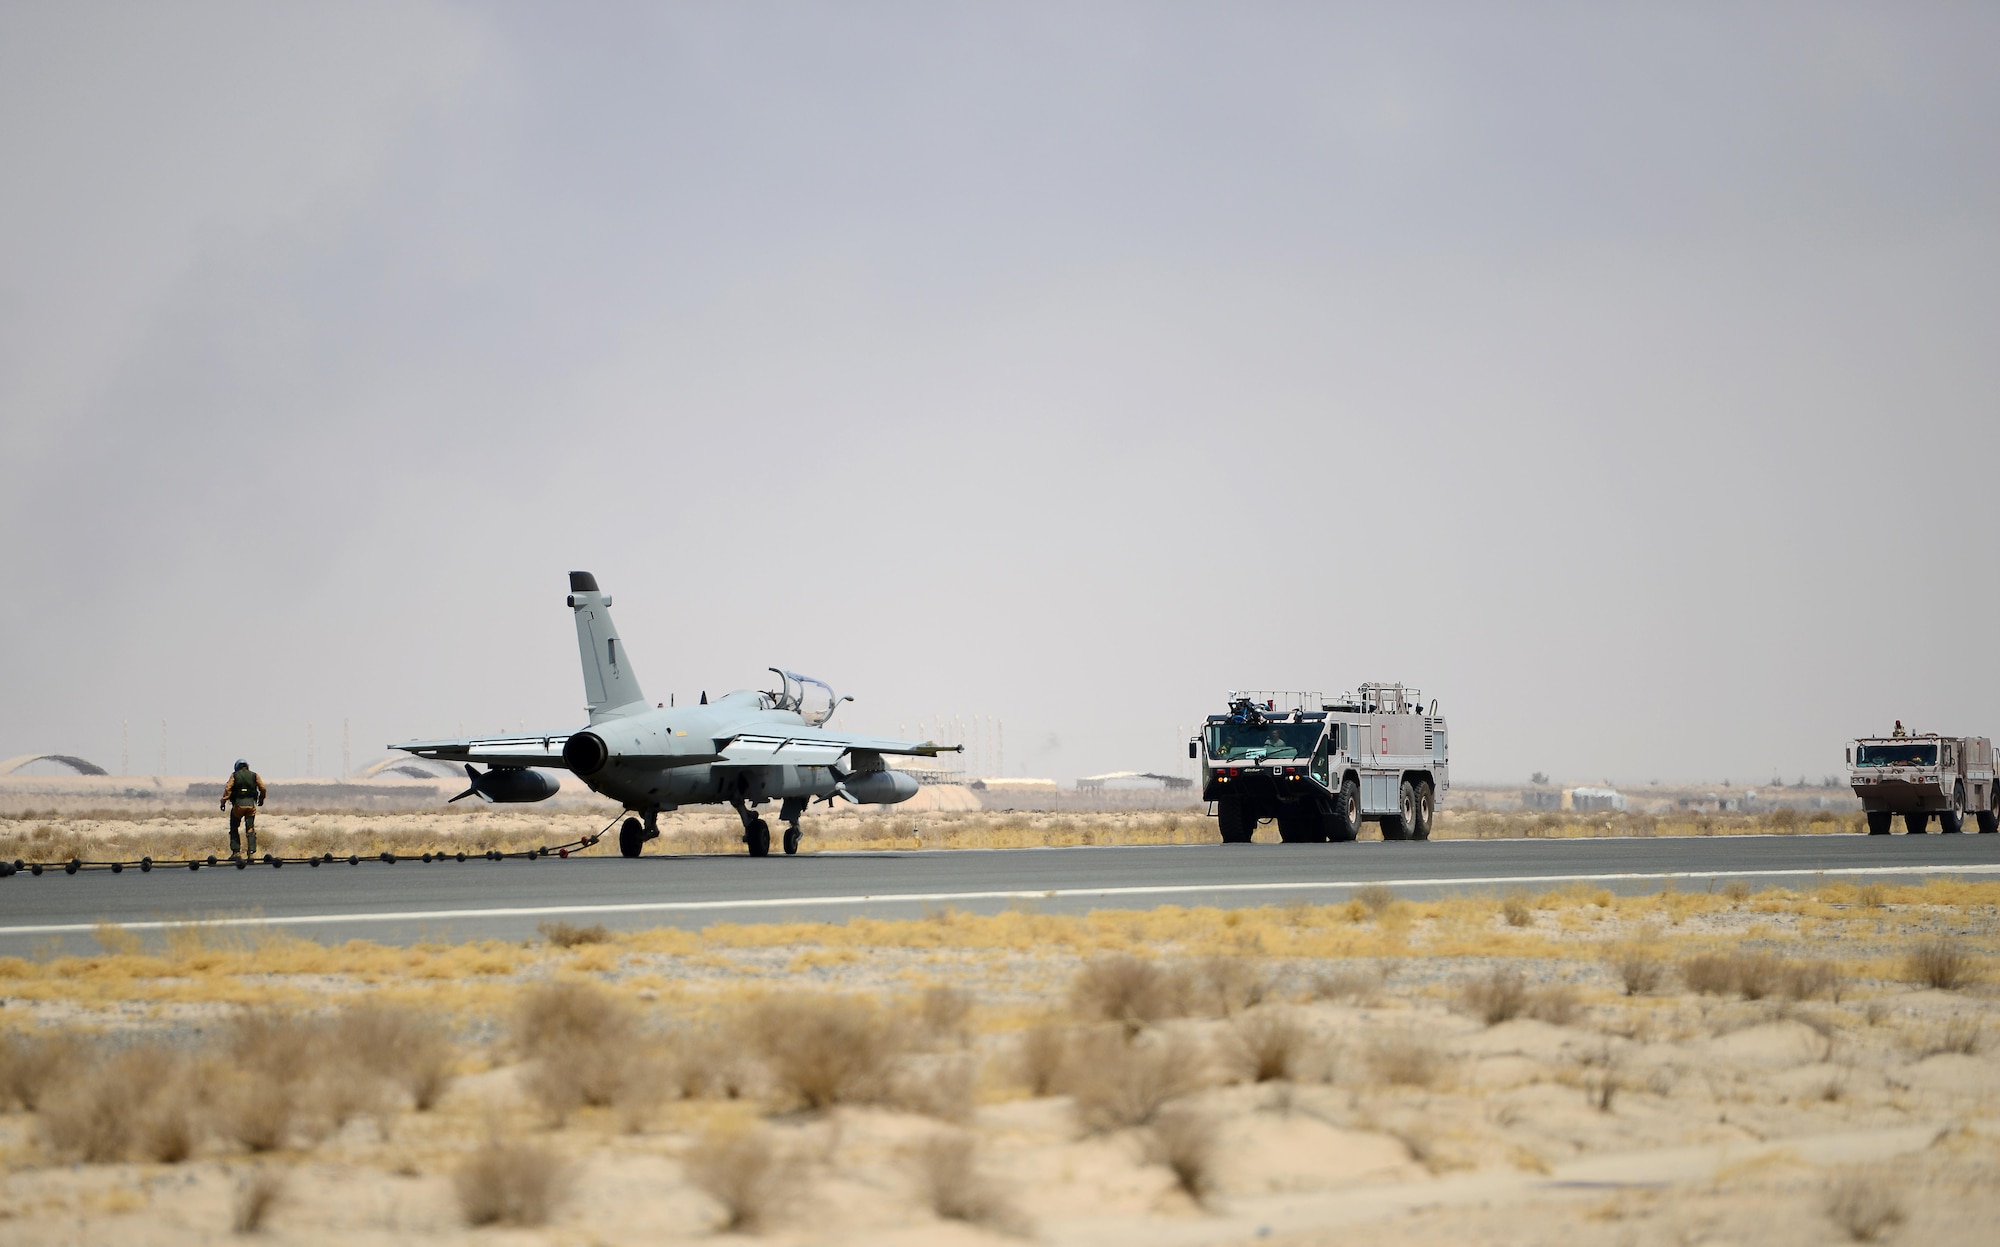 U.S. Air Force fire fighters assigned to the 407th Expeditionary Civil Engineer Squadron, respond to an aircraft distress call during an Aircraft Arresting System engagement with an Italian Air Force AMX A-11 Ghibli aircraft in Southwest Asia on July 3, 2017. The 407th ECES fire department operate as first responders to all U.S. and coalition aircraft in the area of responsibility. (U.S. Air Force photo by Tech. Sgt. Andy M. Kin)